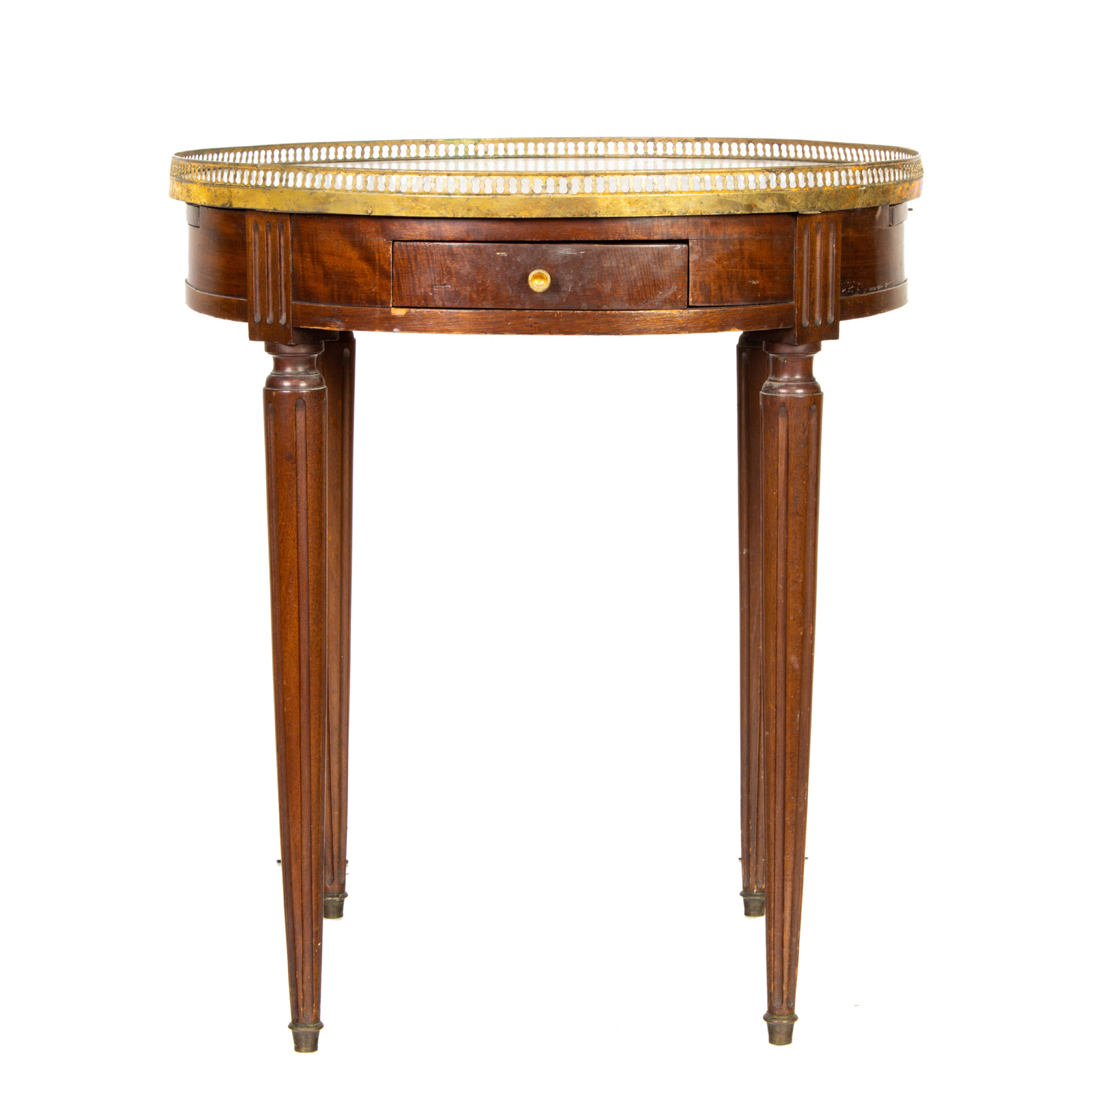 LOUIS XV STYLE MARBLE CENTER TABLE  3a1b17